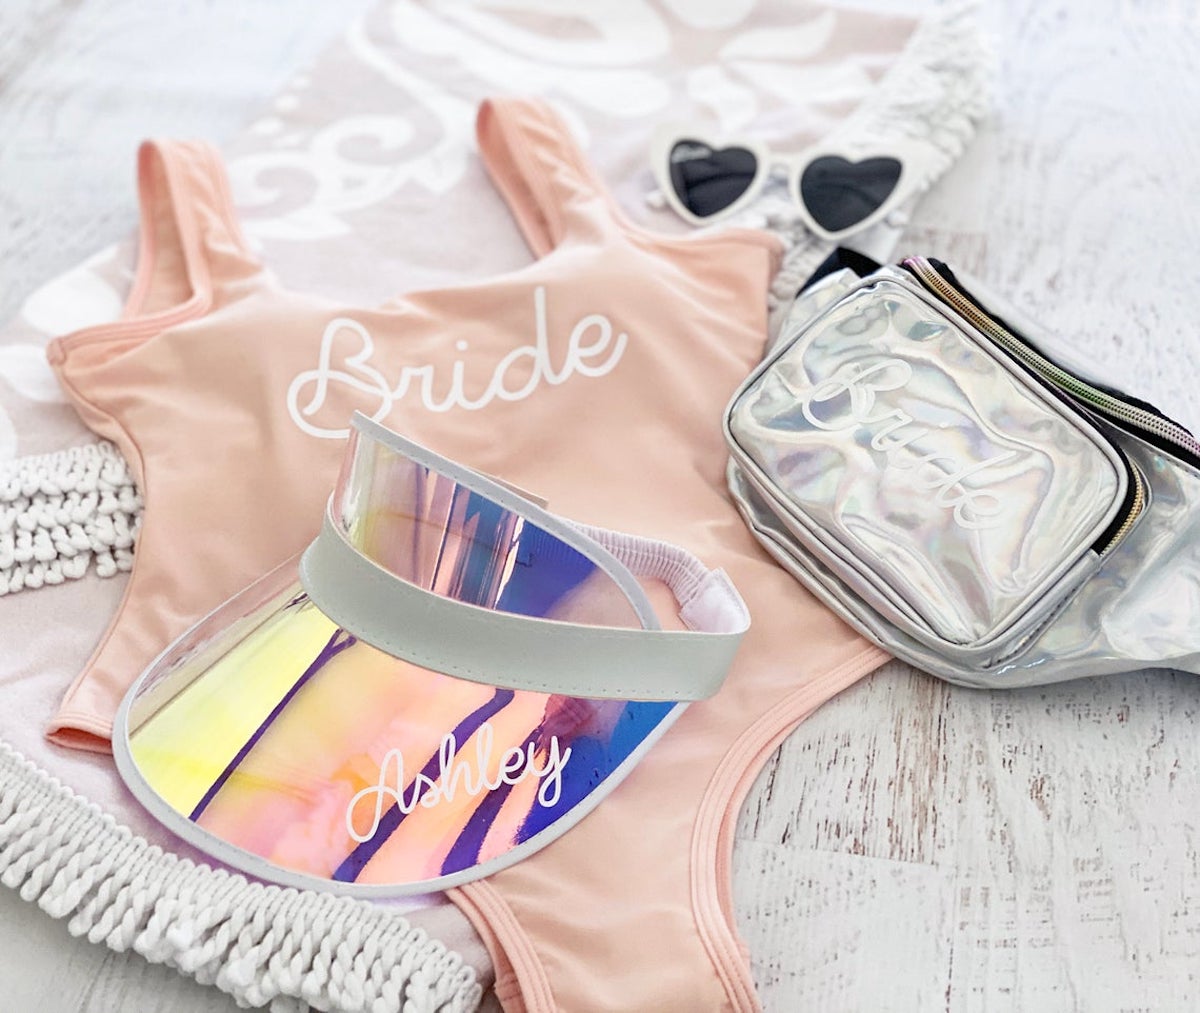 10 Instagram Noteworthy Bridesmaids Offers They are going to Brag About